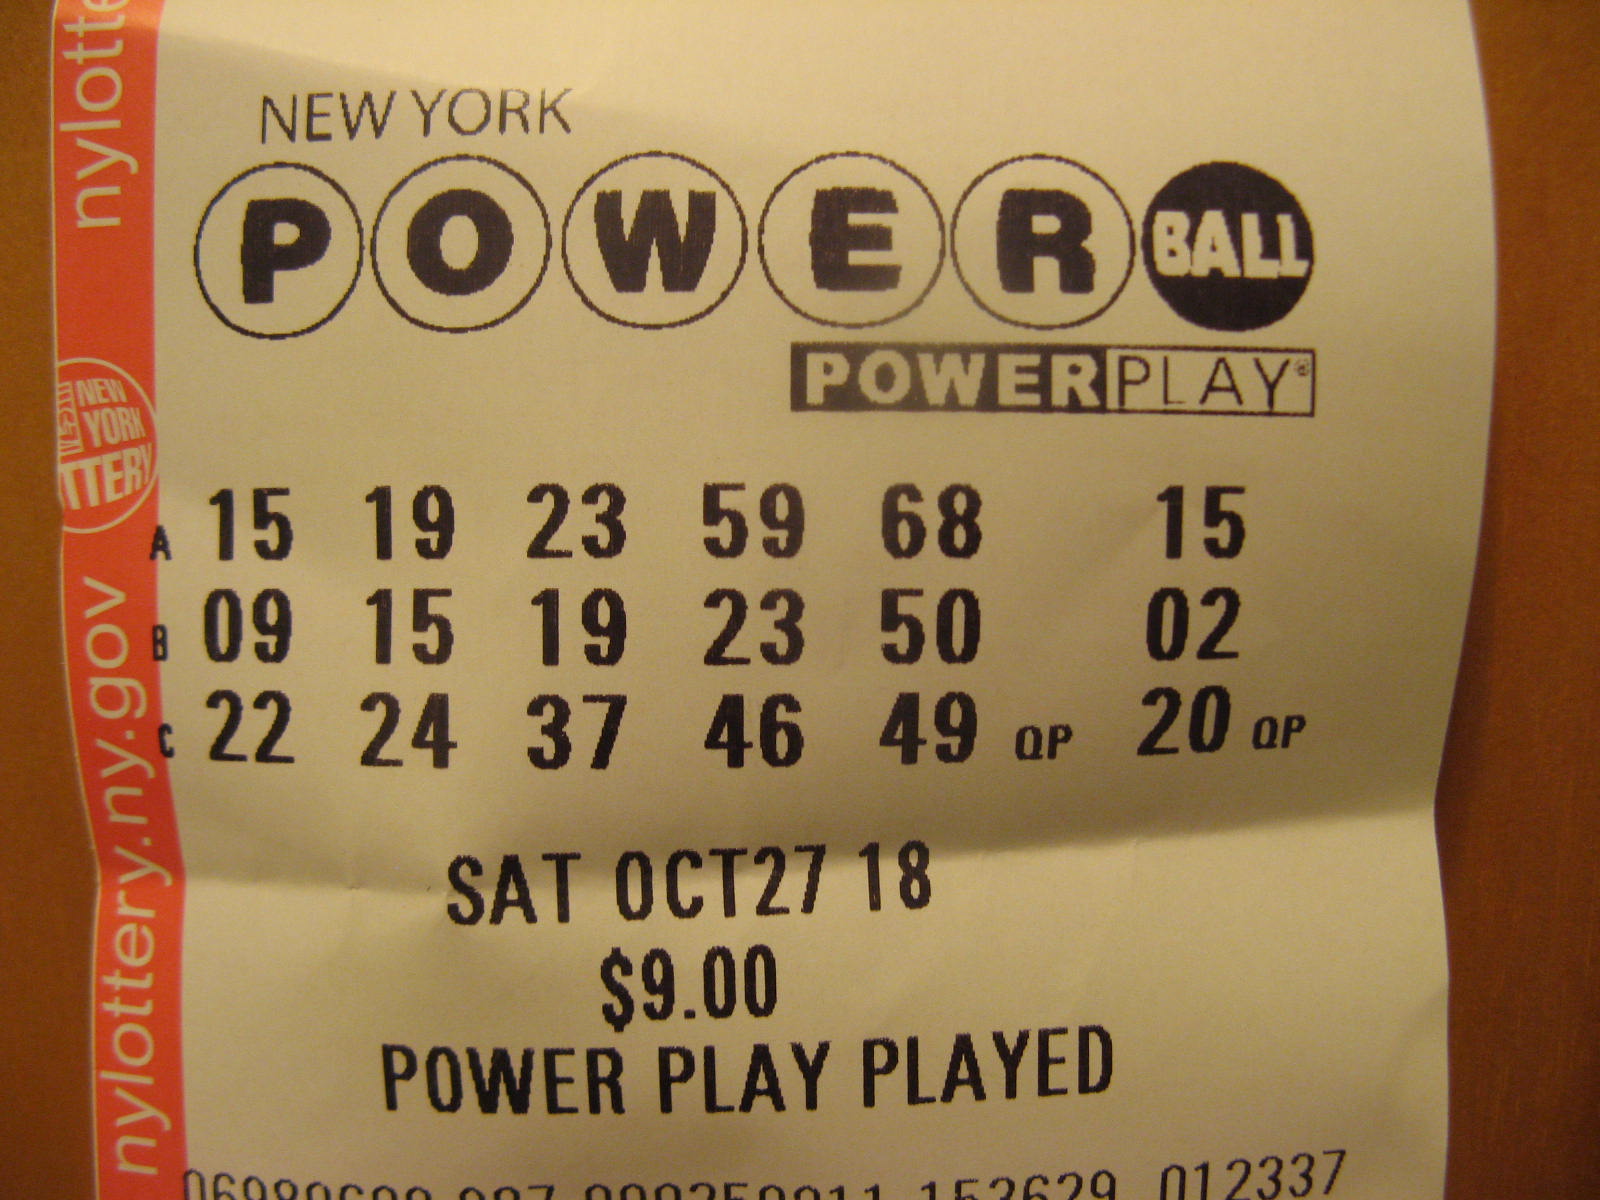 cwhat is the current powerball jackpot